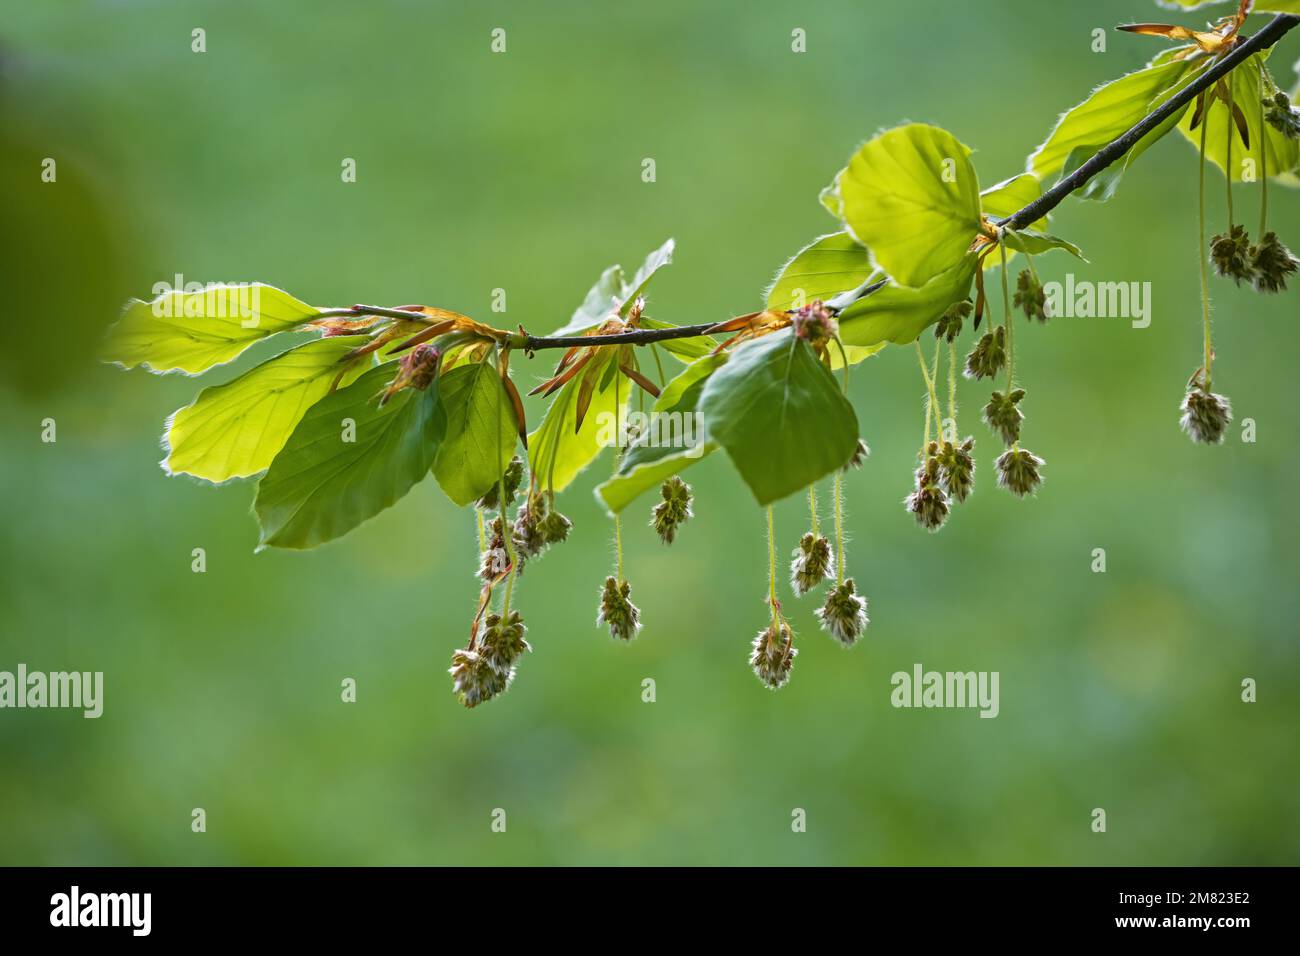 Hanging hairy male flowers and young leaves on a branch of a beech tree (Fagus sylvatica) in spring, natural green background, copy space, selected fo Stock Photo